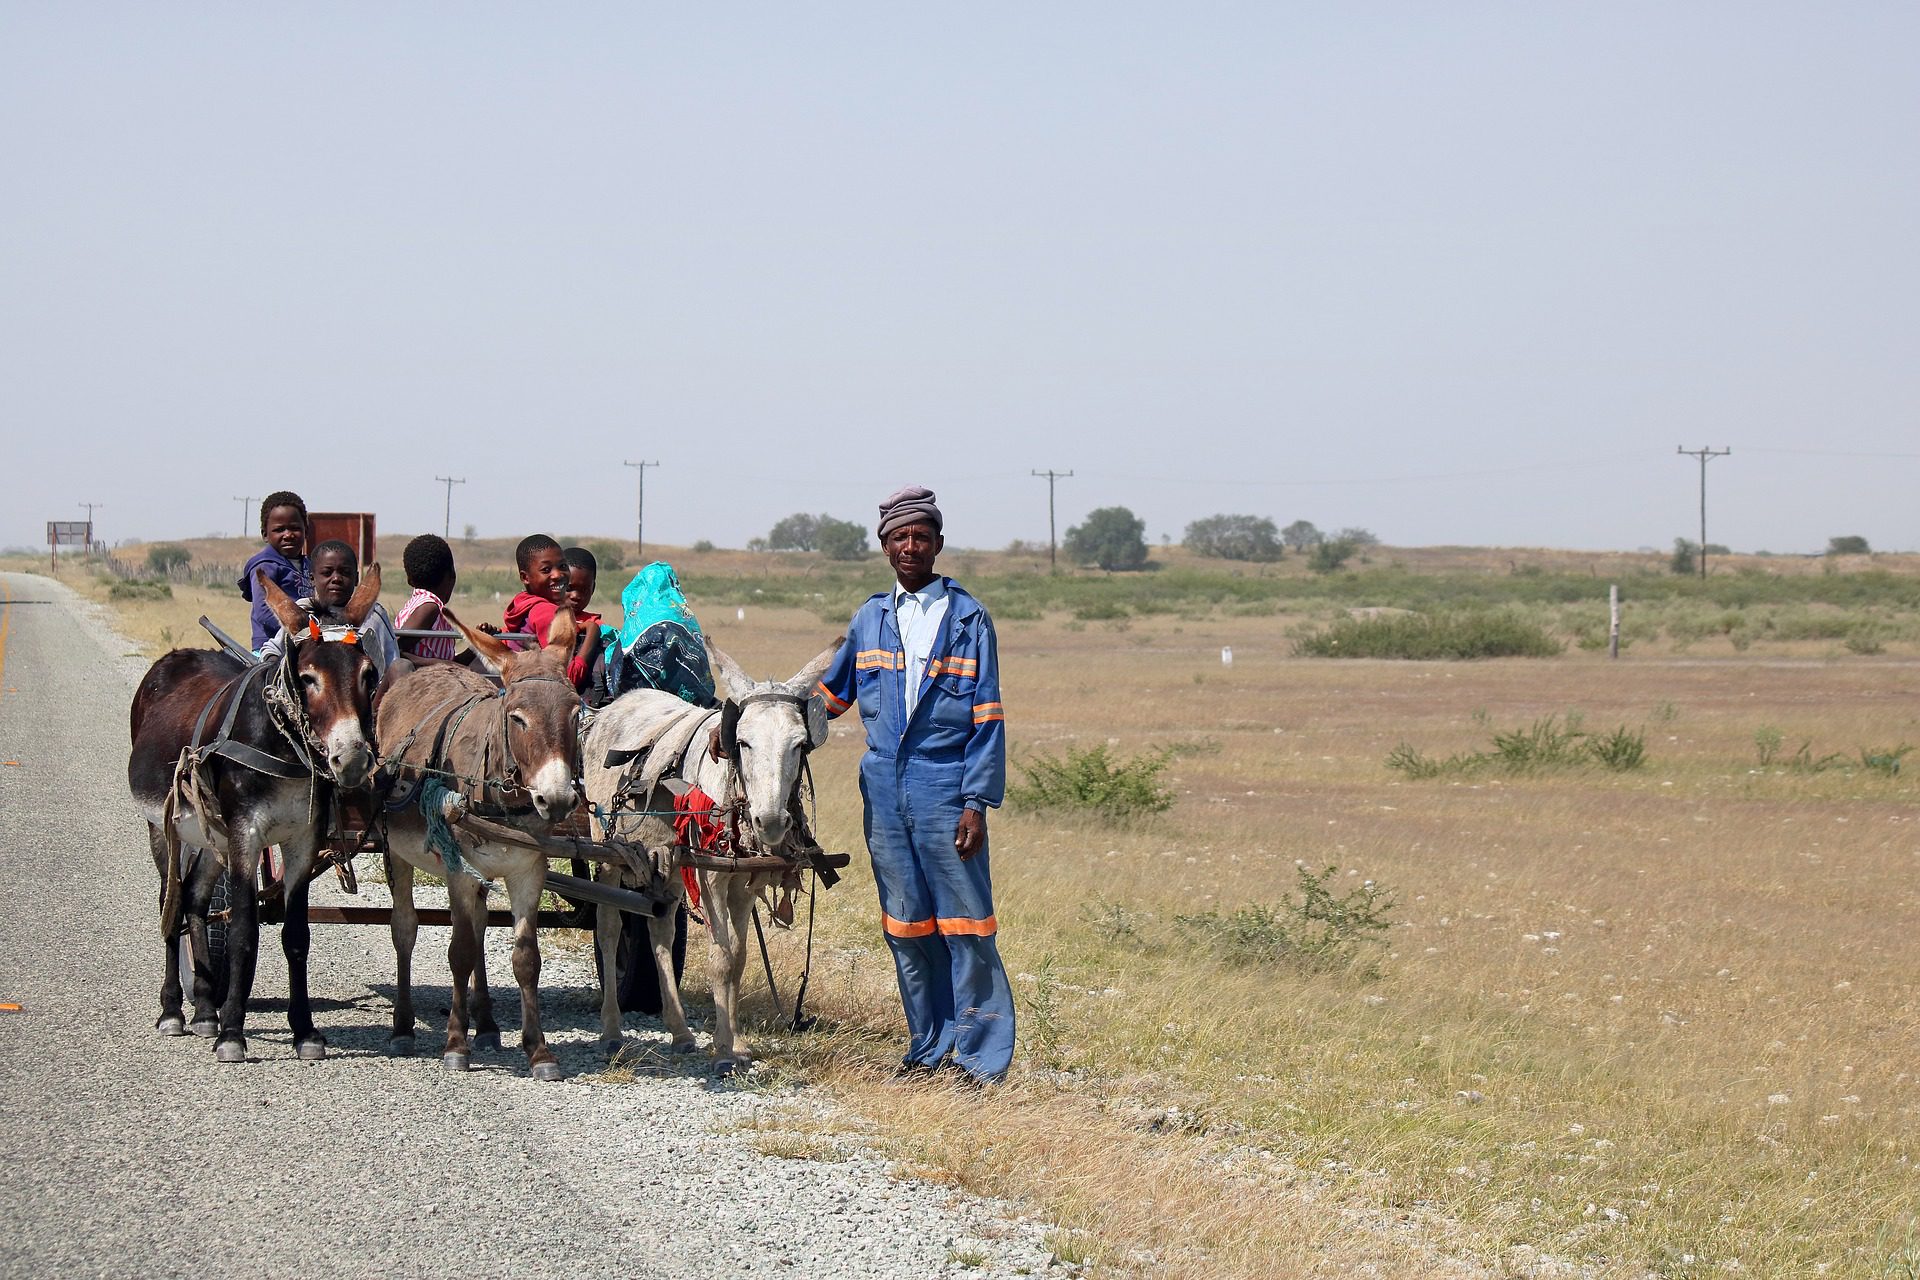 Roaming Africa: Migration, Resilience and Social Protection